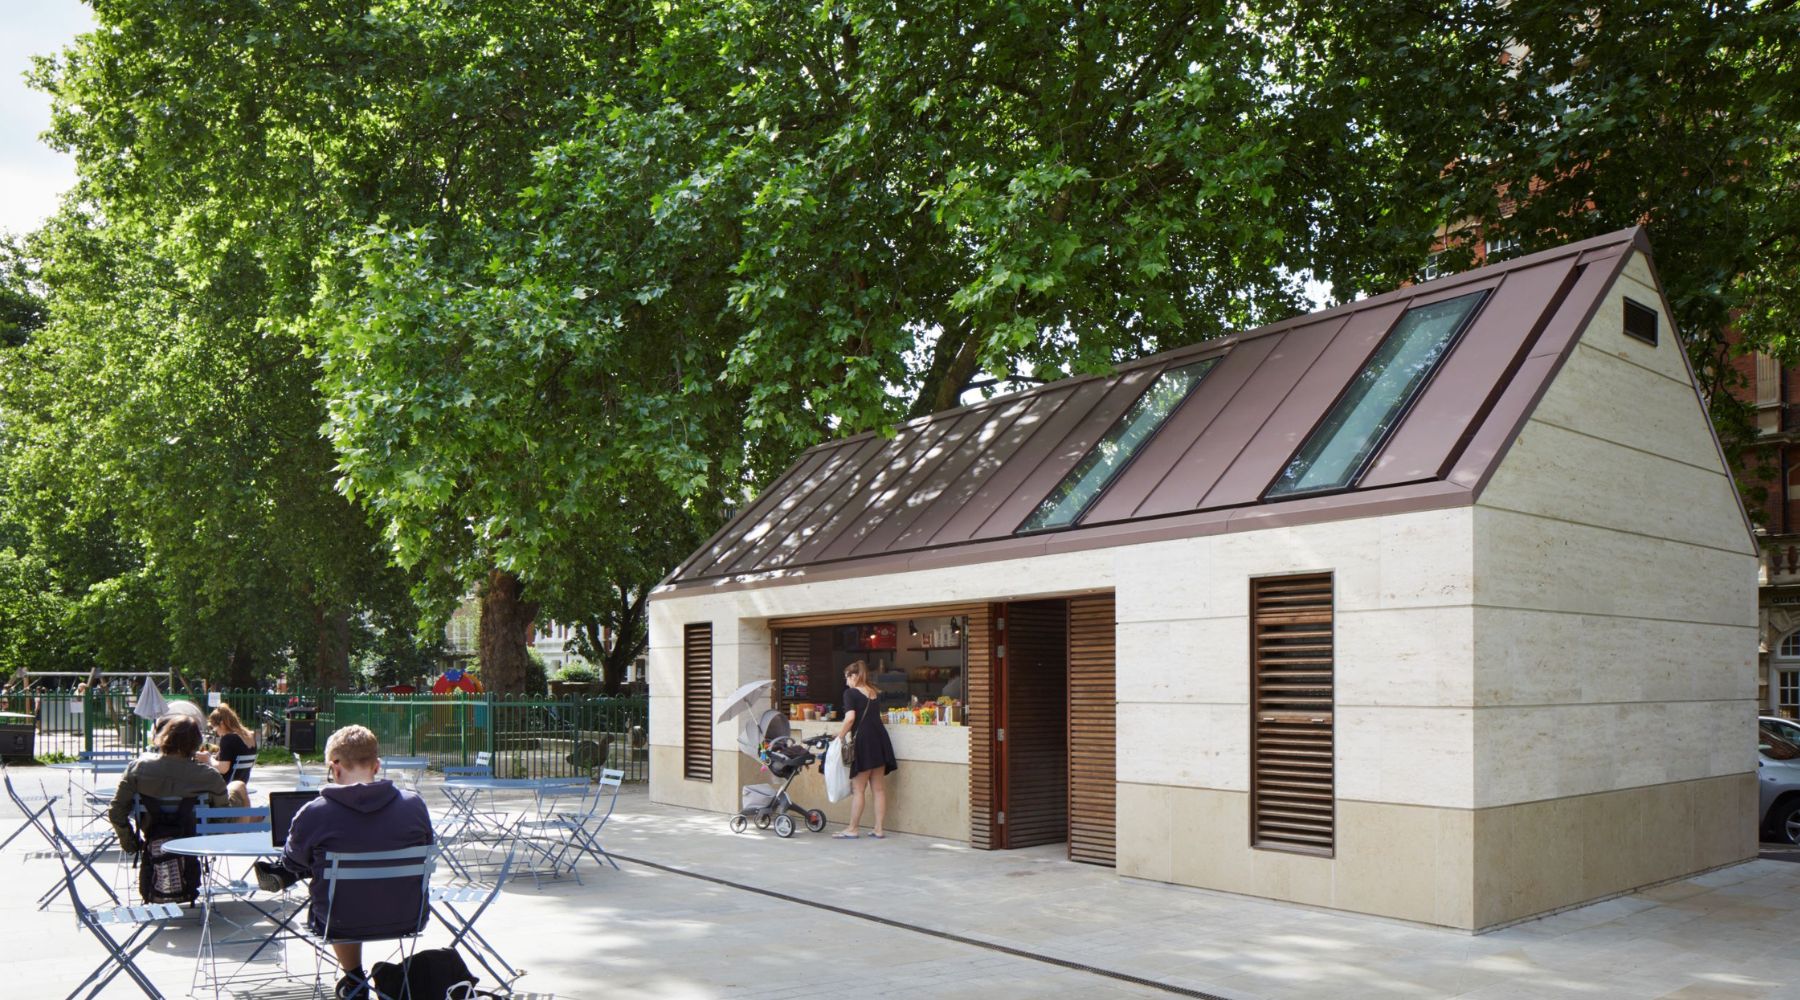 External shot of Brook Green Pavilion with leafy green trees behind and people sitting on outdoor furniture in front 